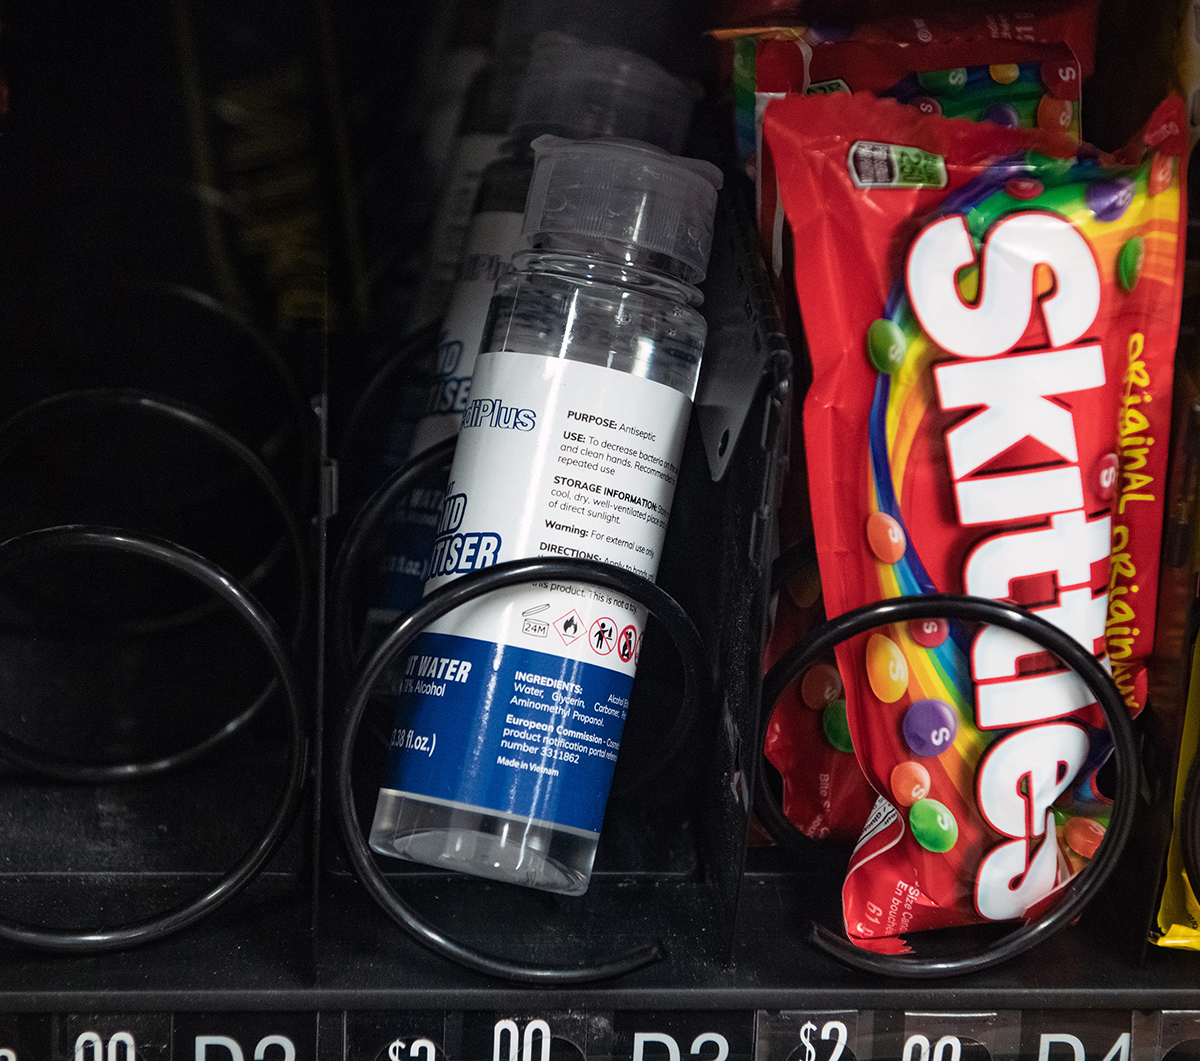 Bottles of hand sanitizer and packages of Skittles inside a vending machine